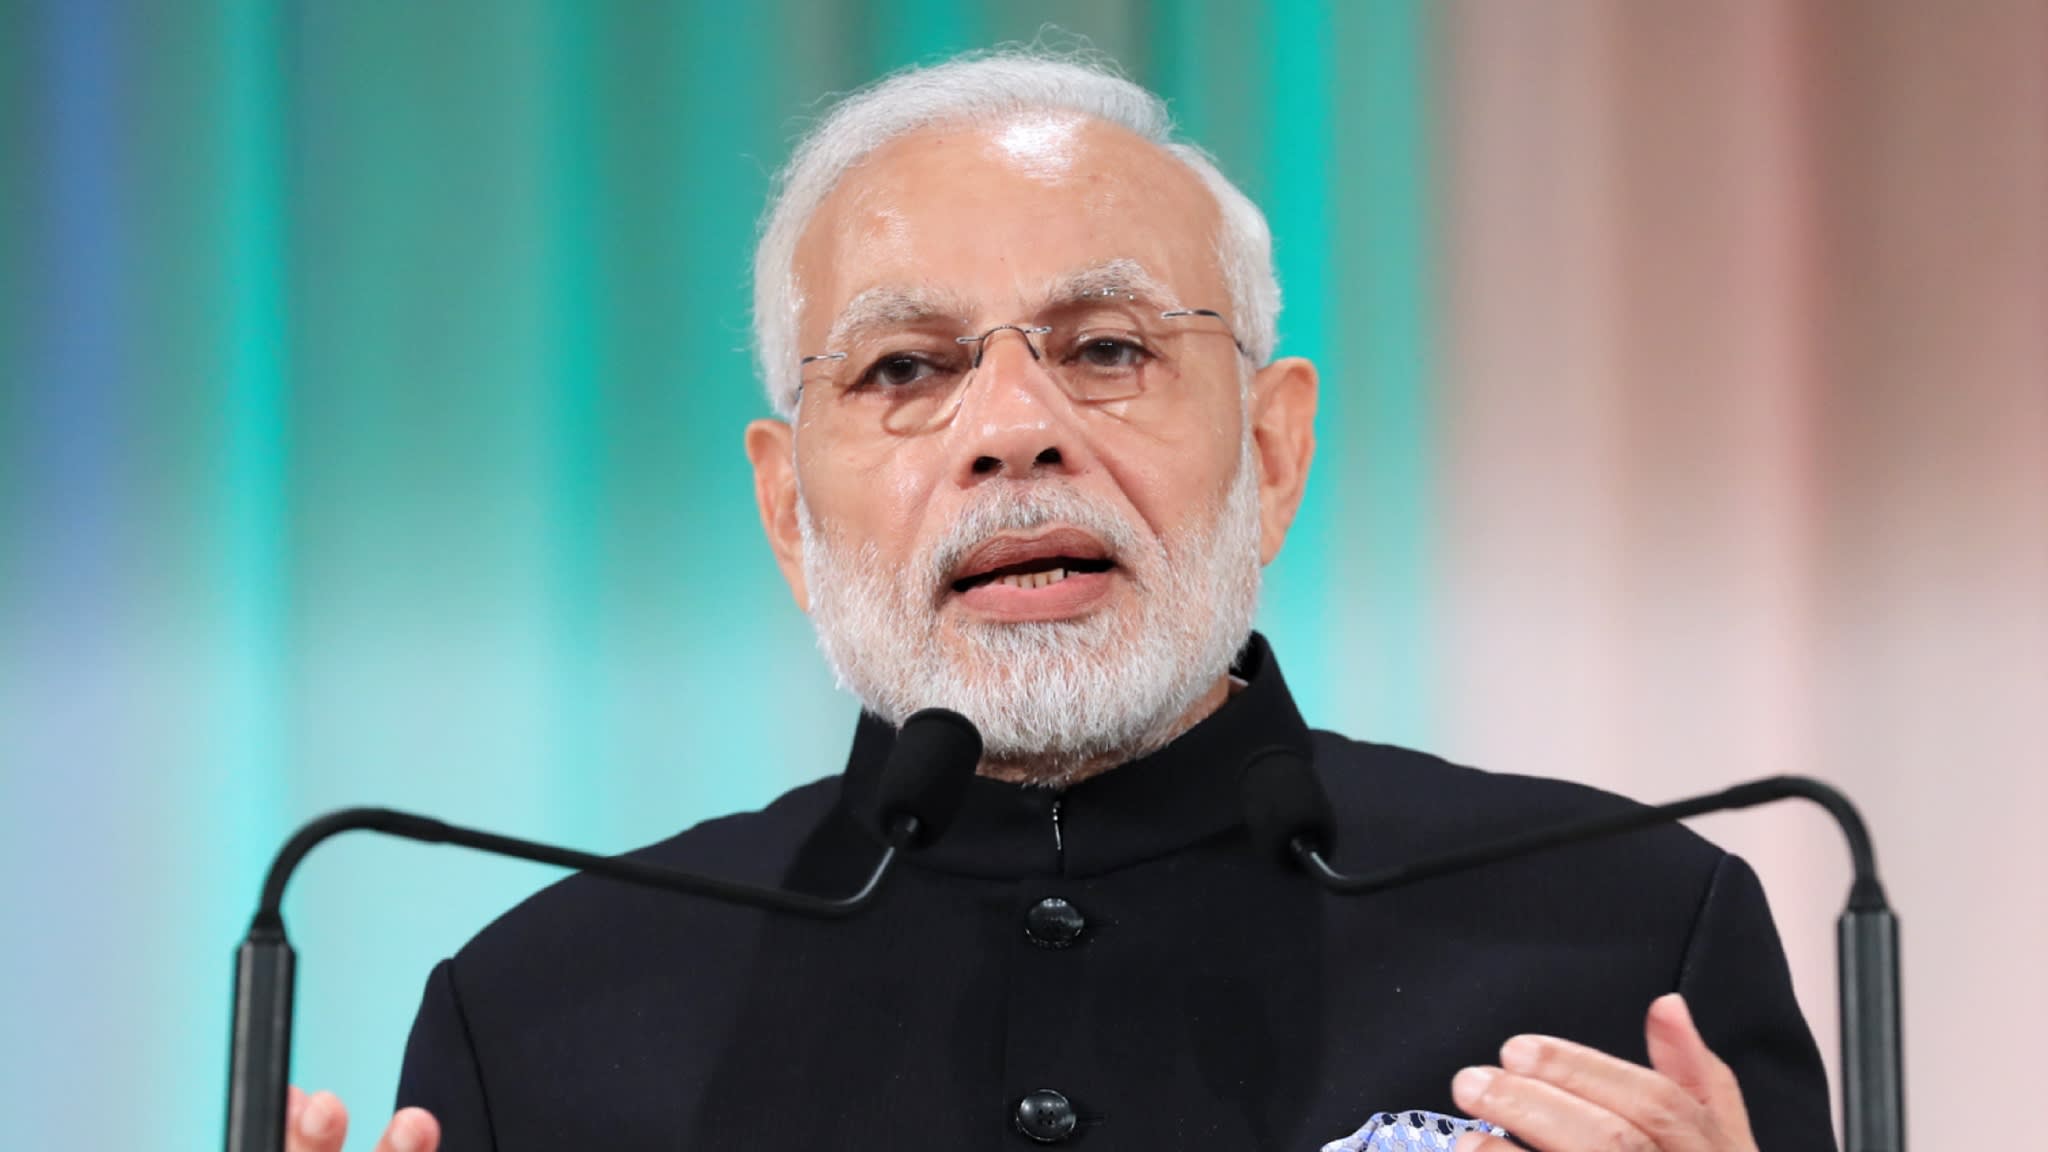 Global challenge of Covid has given scope to innovate: Modi